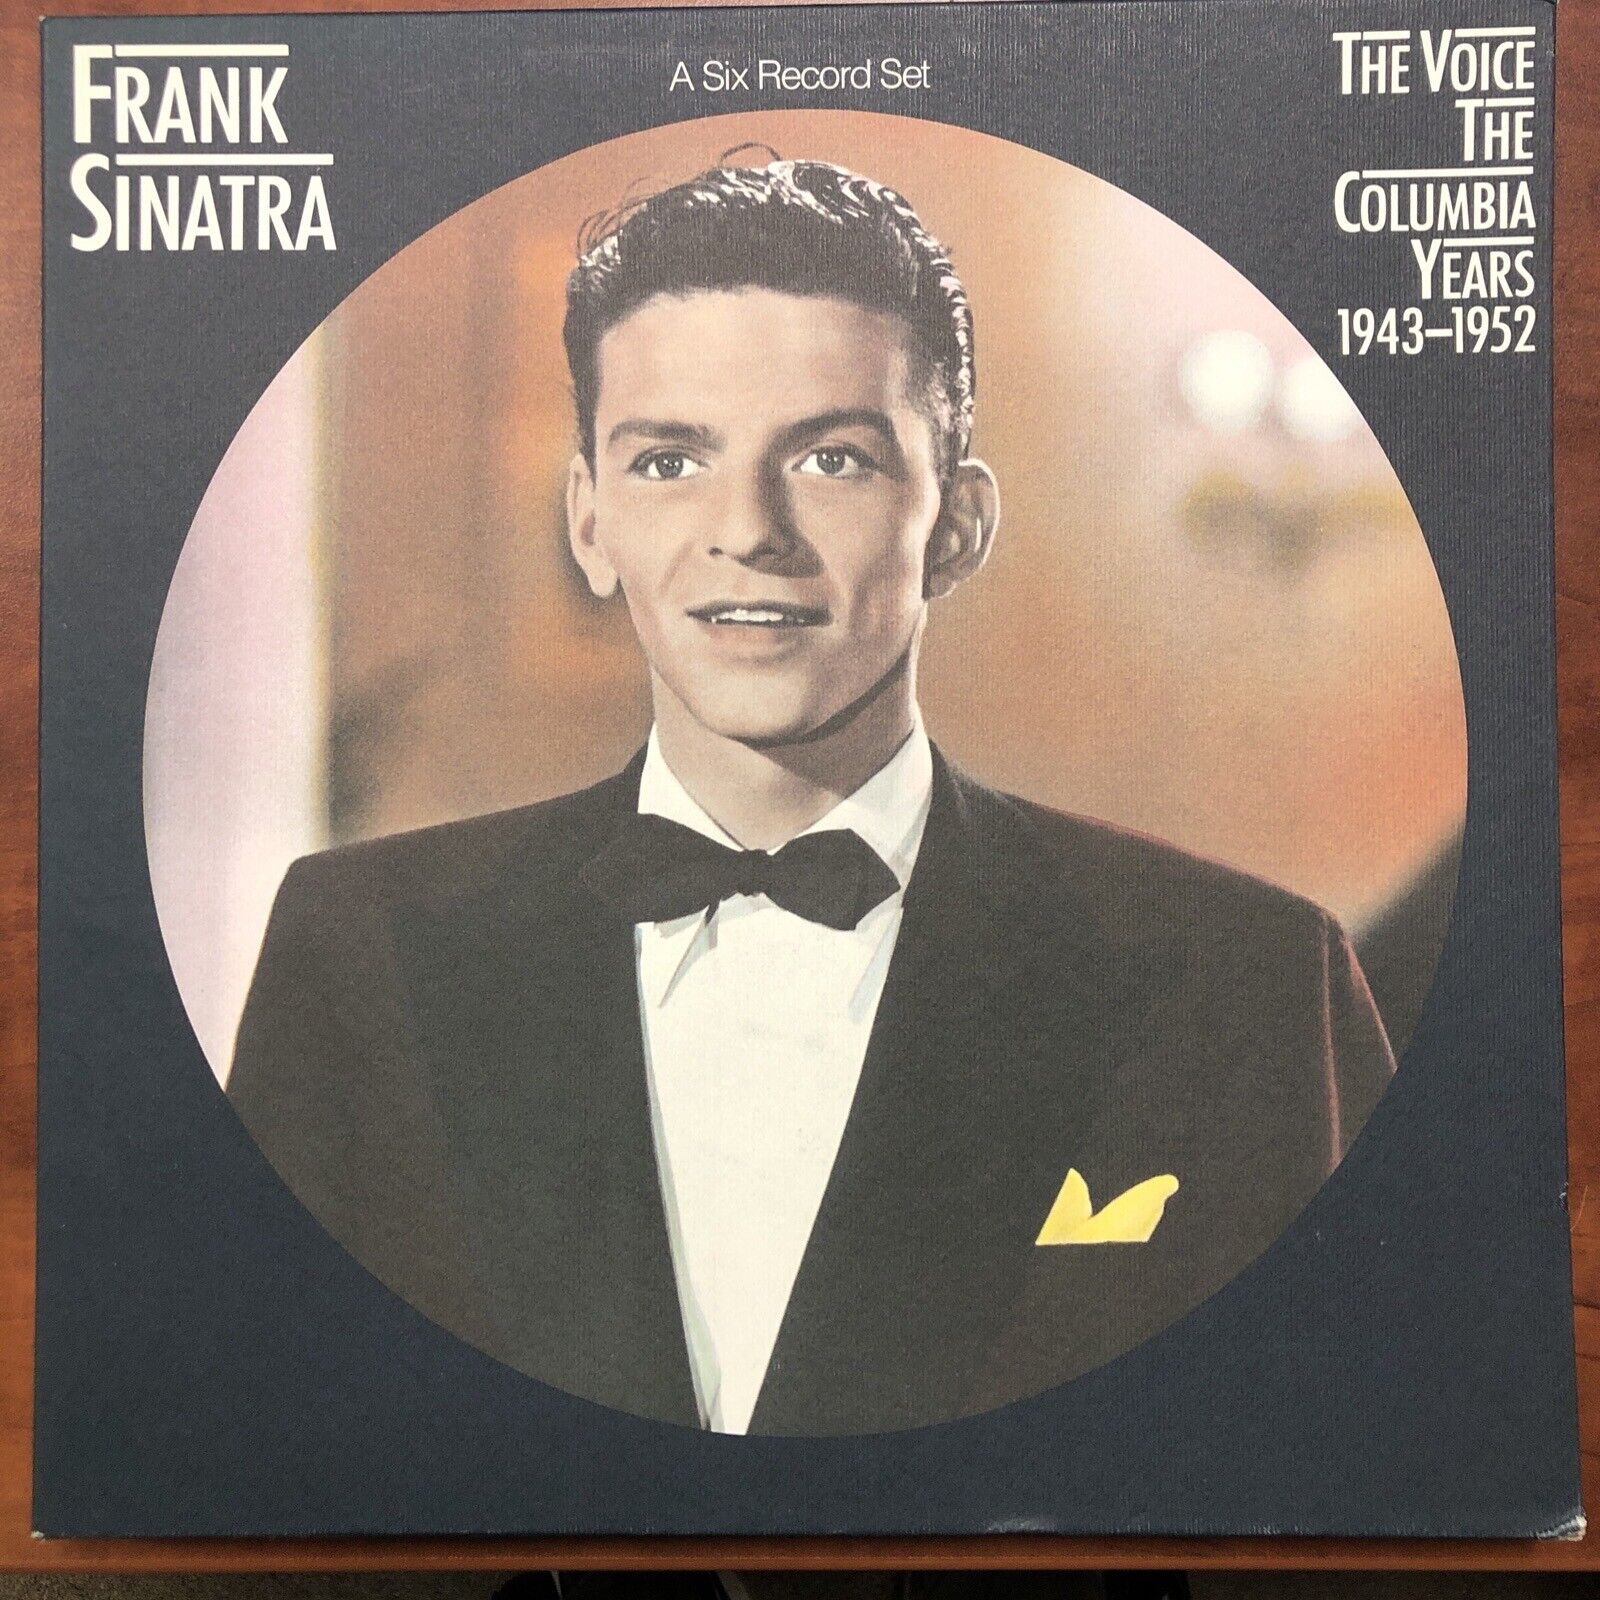 Frank Sinatra The Voice The Columbia Years 1943-1952 - 6 Album Boxed Set Records